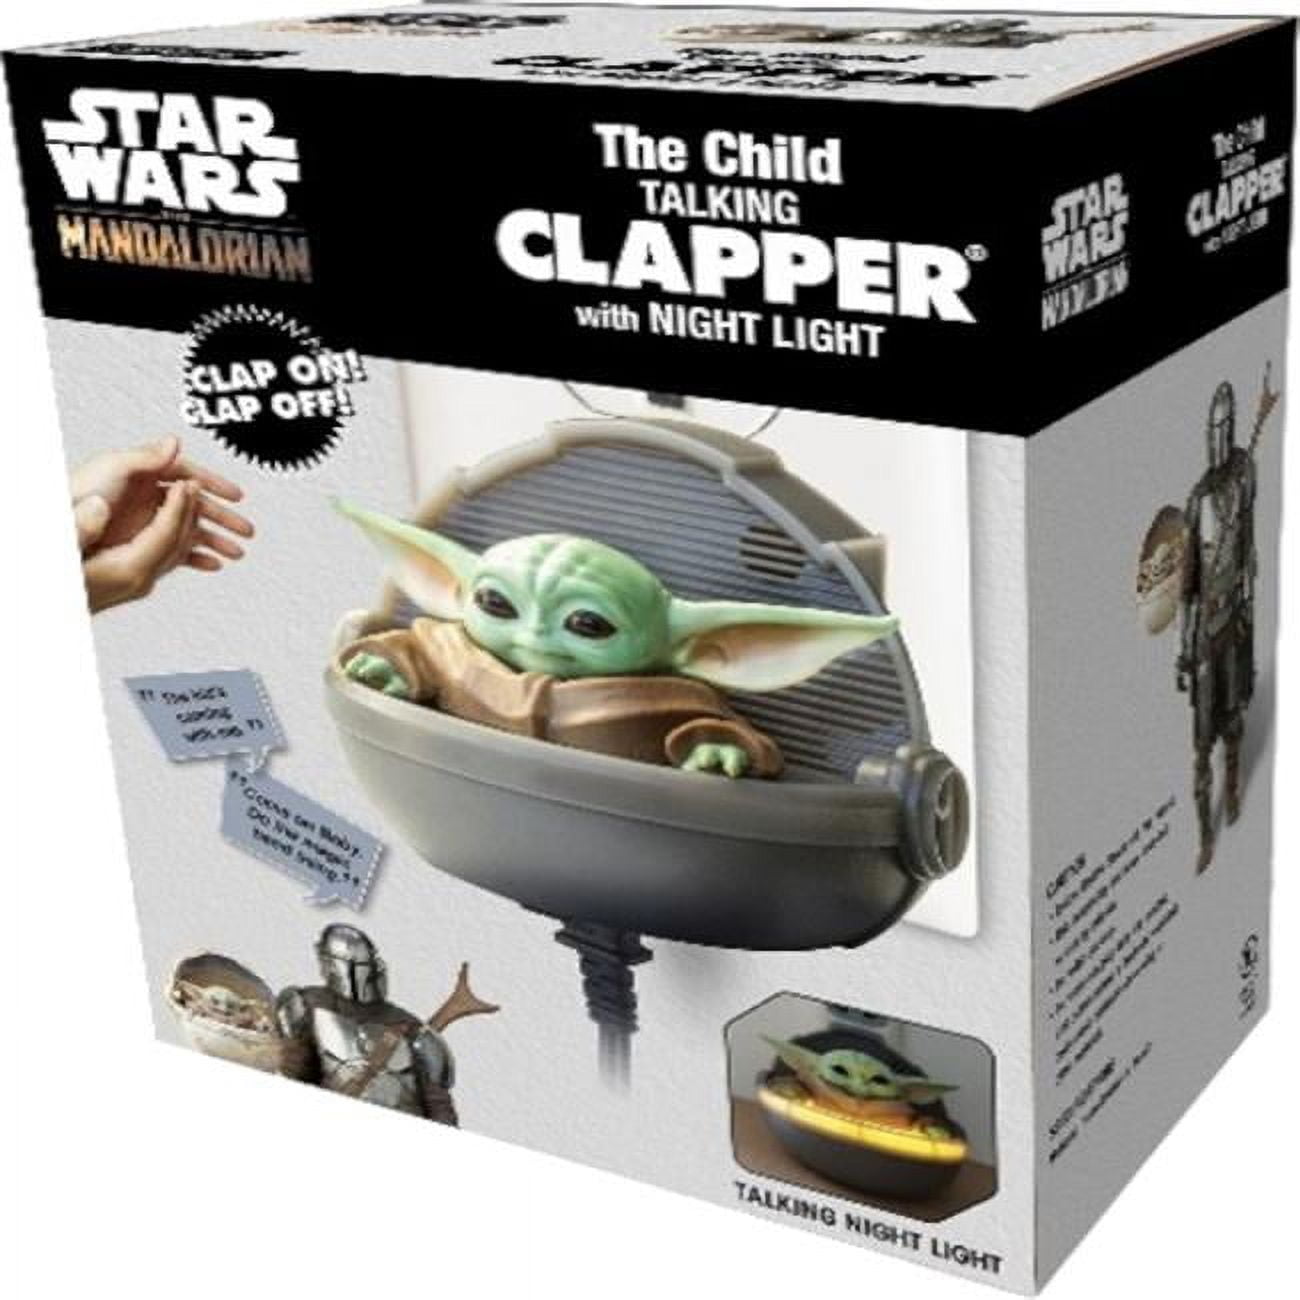 Picture of Clapper 6010466 Star Wars the Child the Mandalorian Talking Clapper with Night Light Plastic